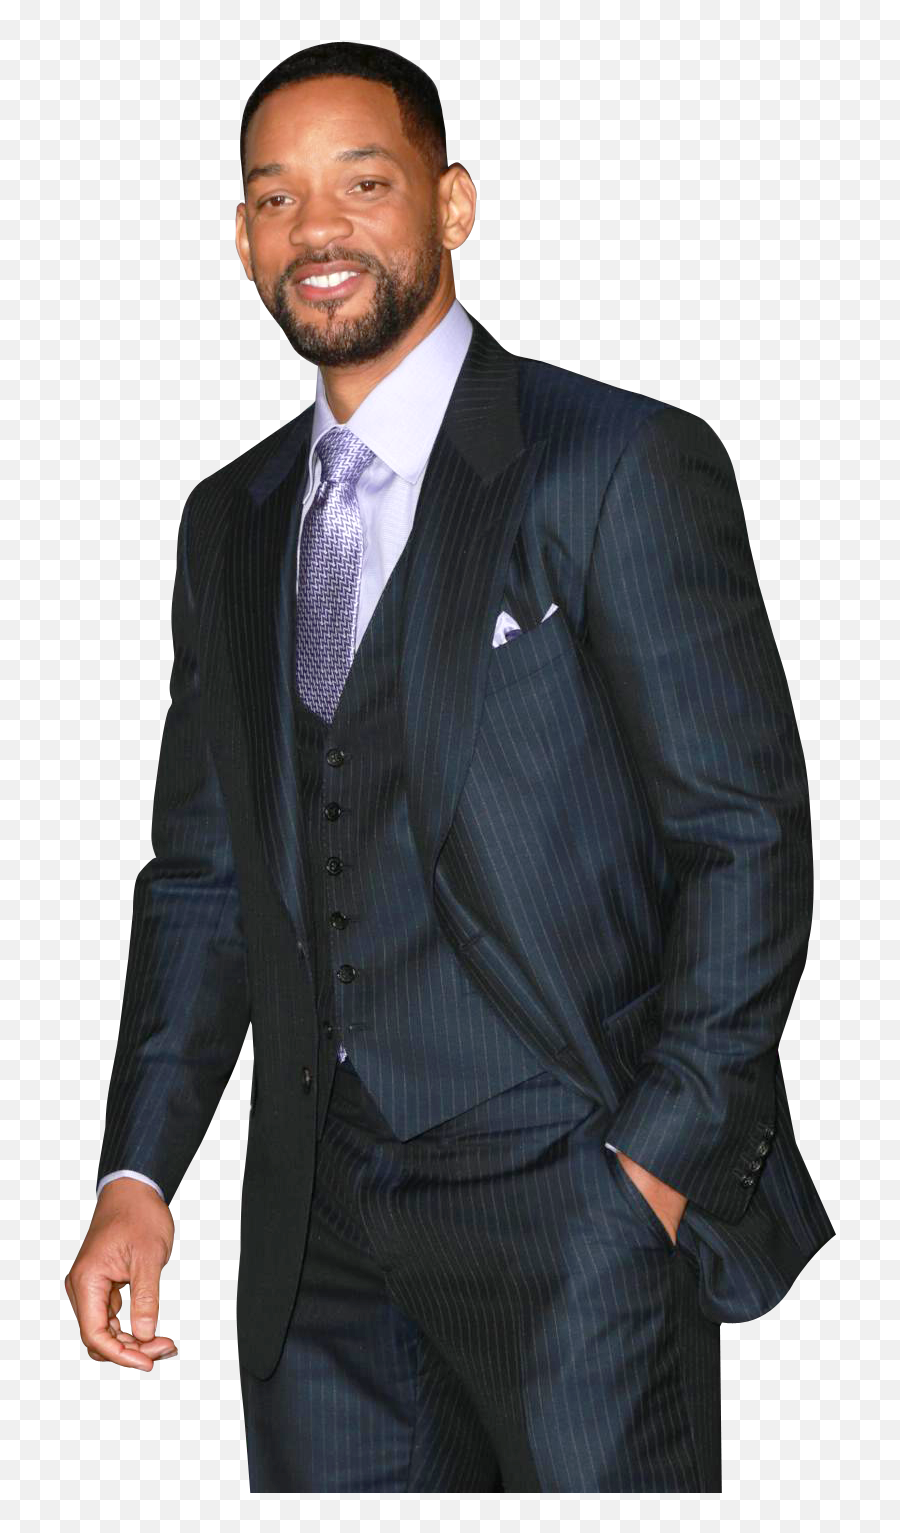 Will Smith Png Transparent Image - Will Smith Png Emoji,Will Smith Transparent